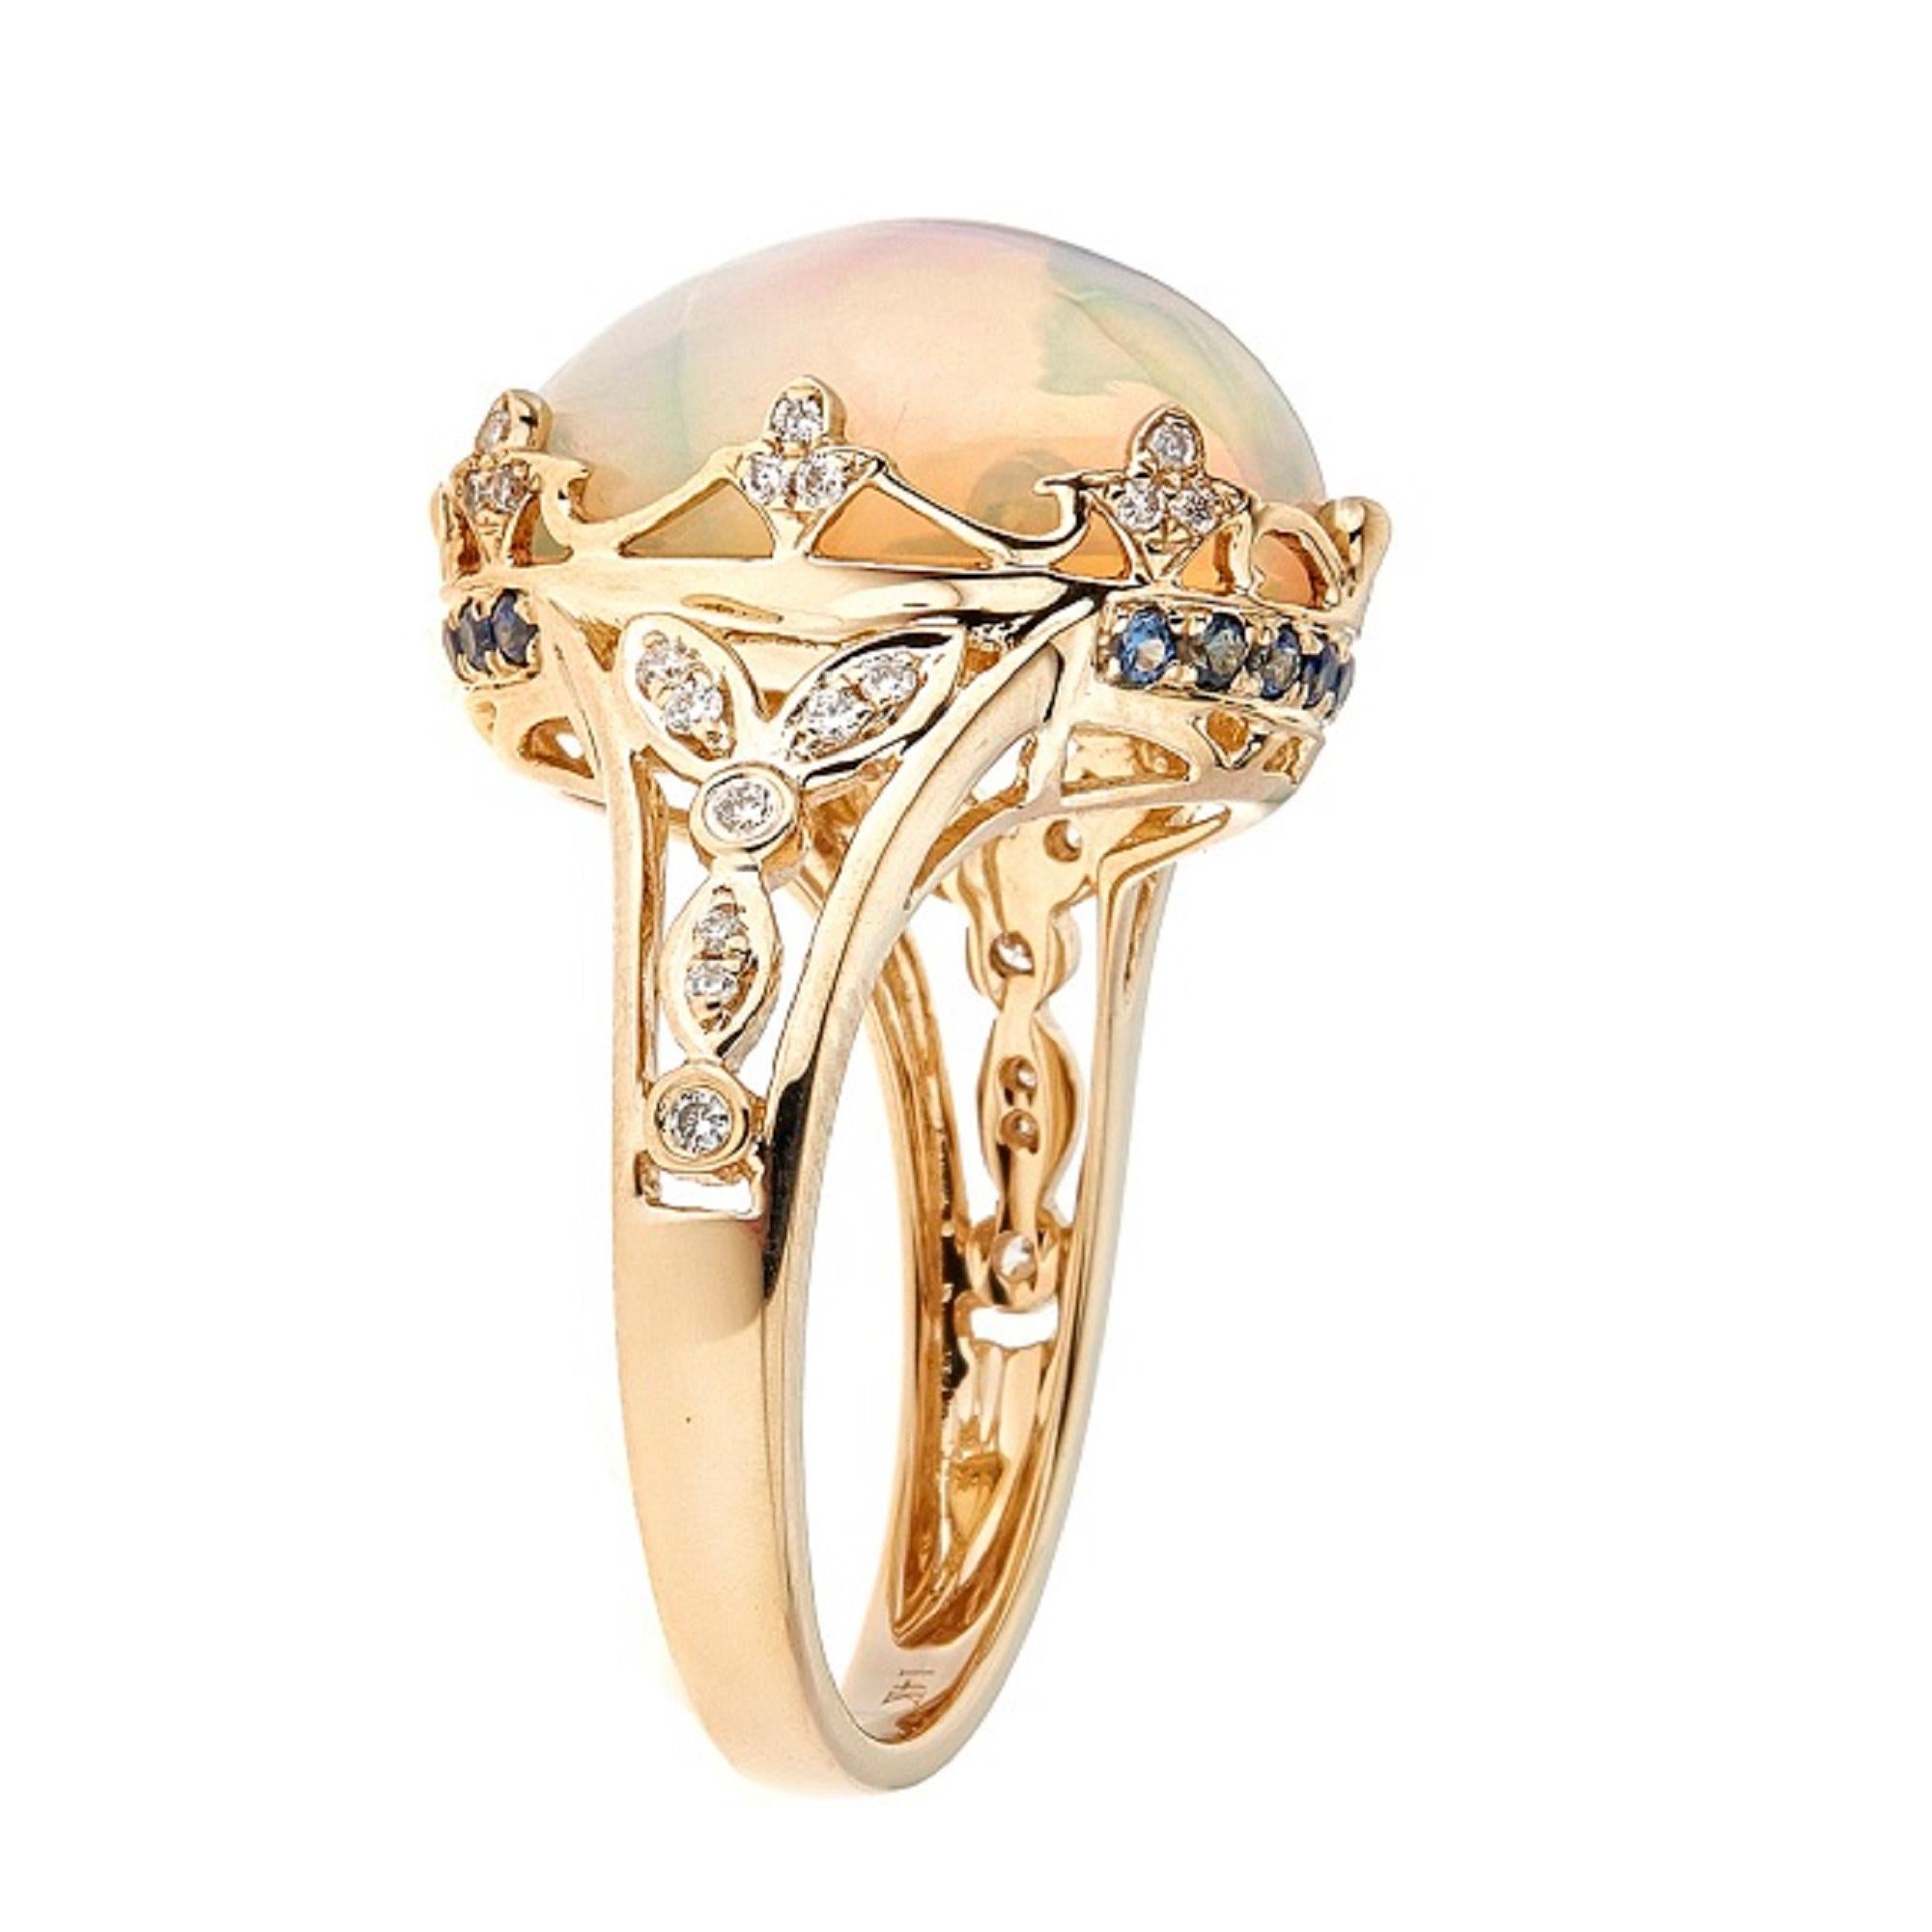 Decorate yourself in elegance with this Ring is crafted from 14-karat Yellow Gold by Gin & Grace. This Ring is made up of 12x16 mm Oval-Cab (1 pcs) 5.60 carat Ethiopian Opal and Round-cut White Diamond (50 Pcs) 0.32 Carat. This Ring is weight 5.92